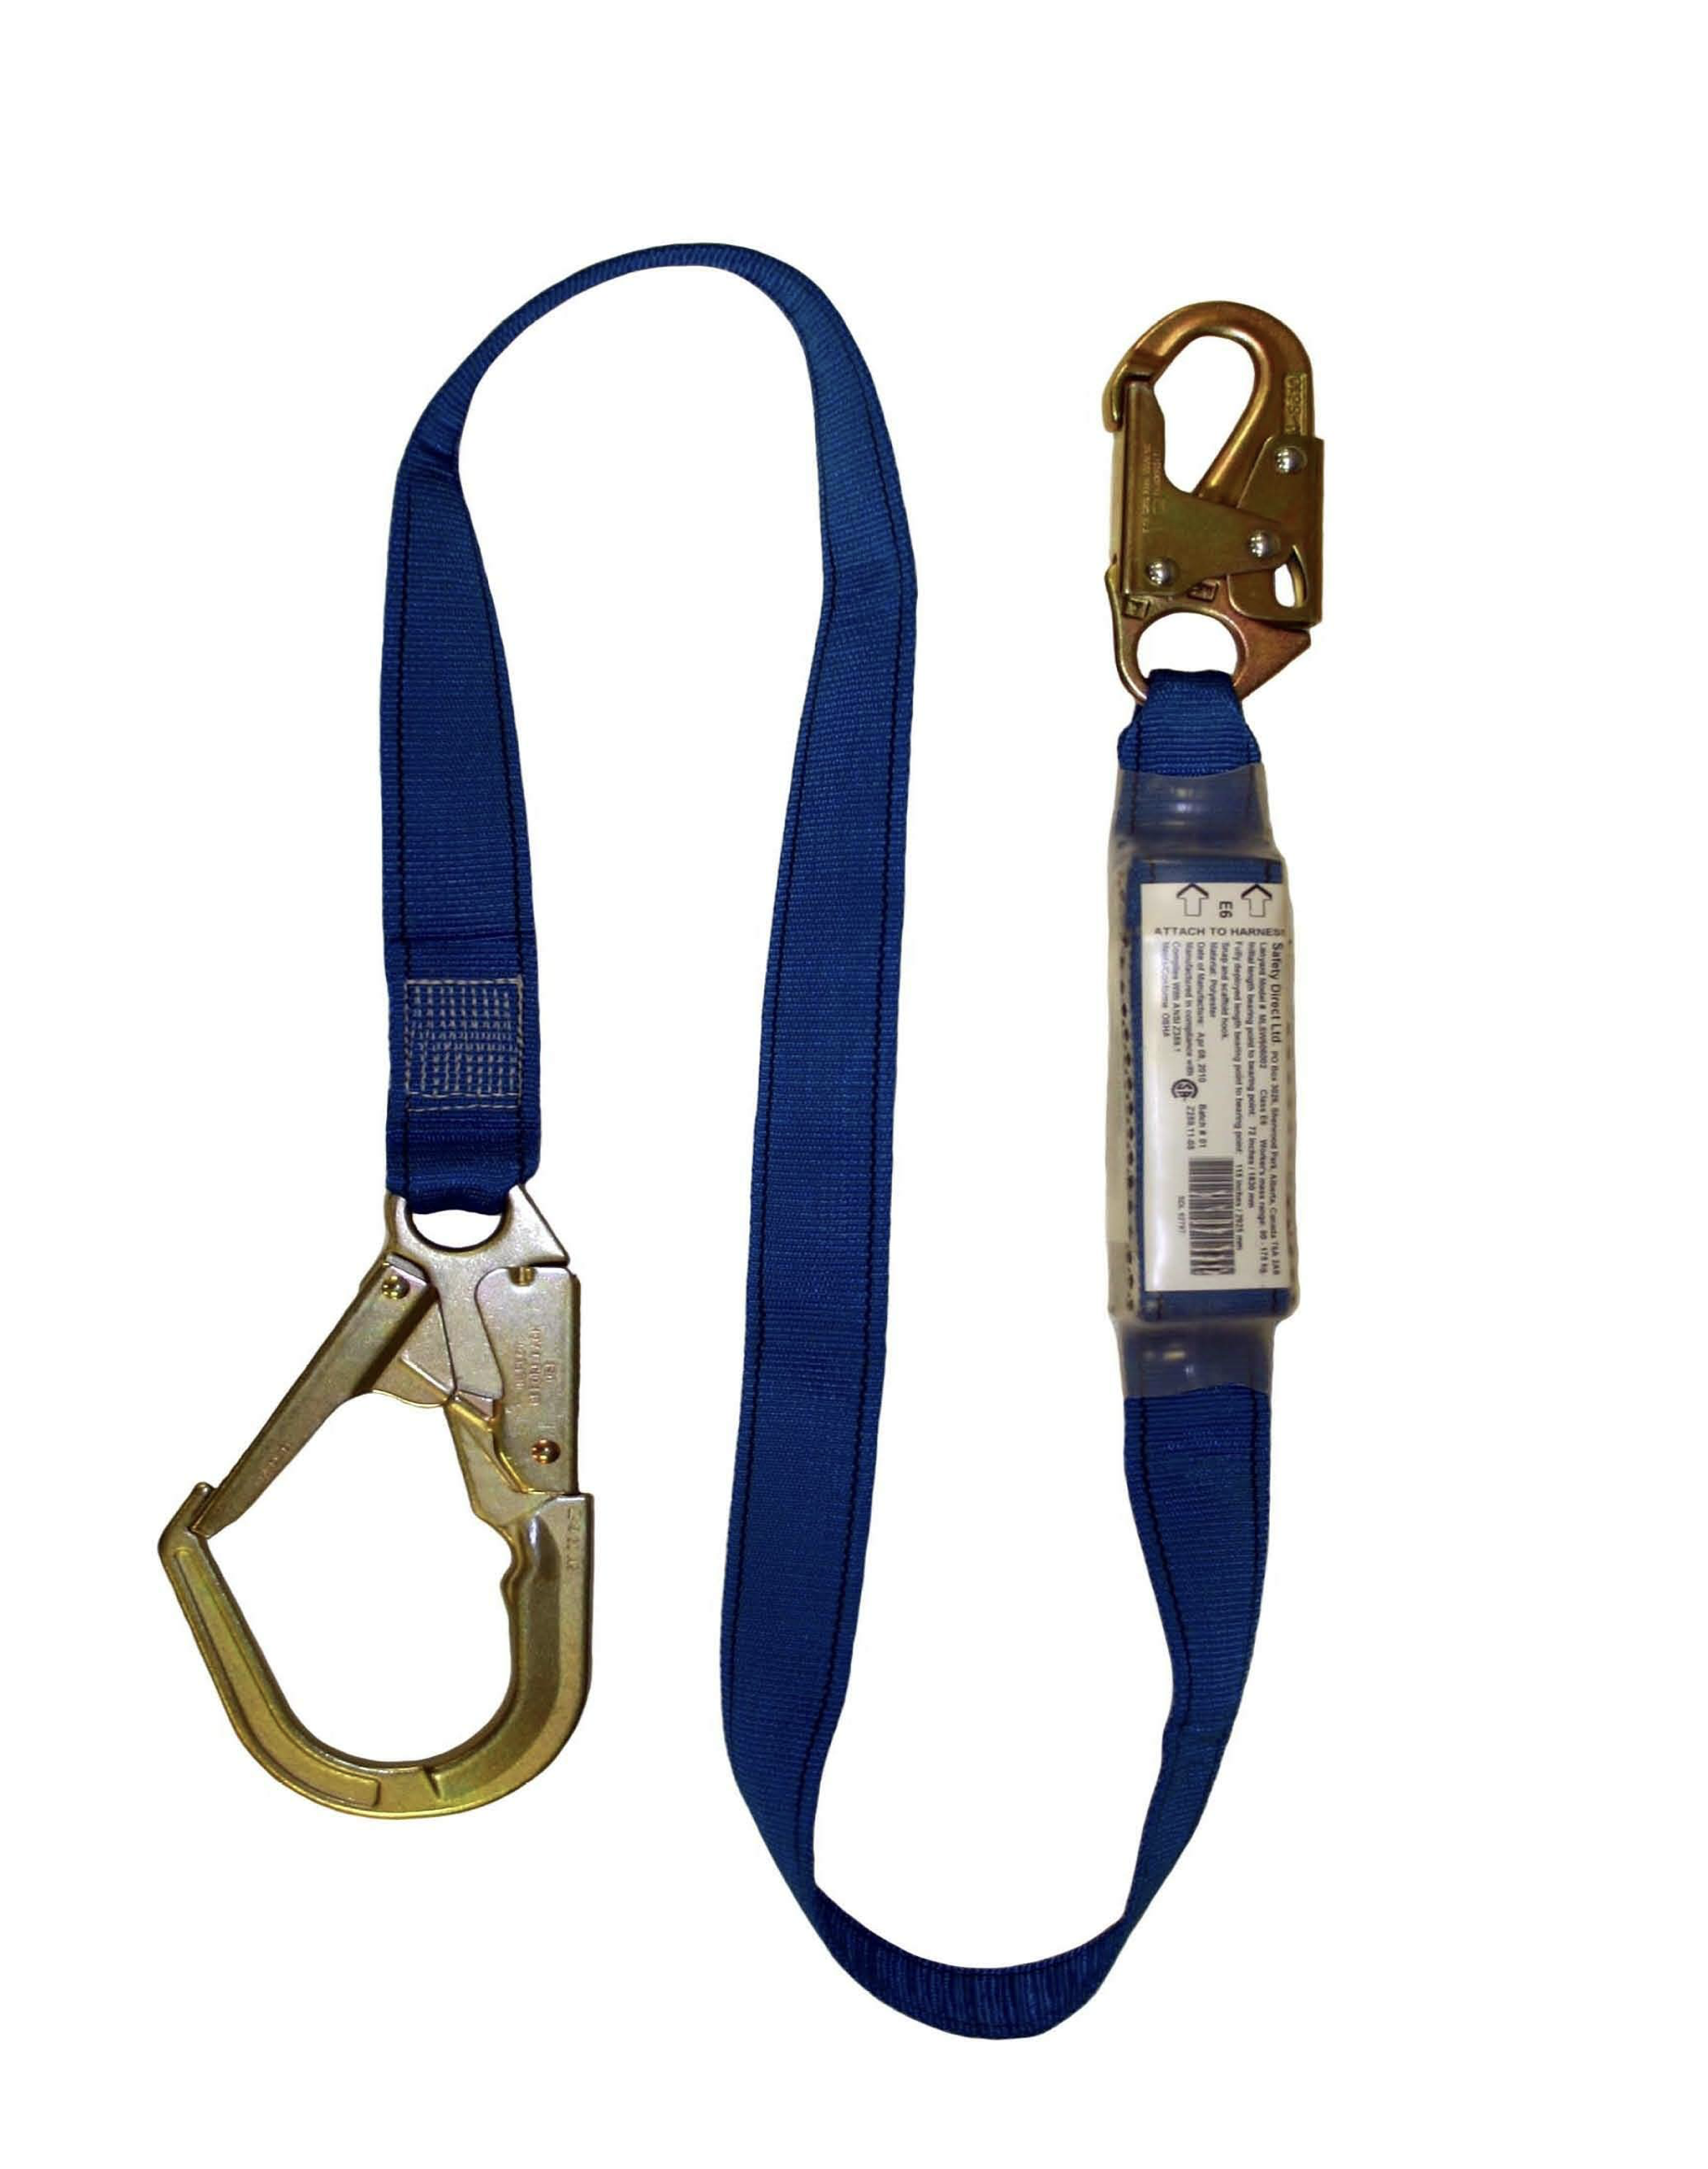 Energy Absorbing Lanyard: 4 ft - E4 with snap hook and rebar hook